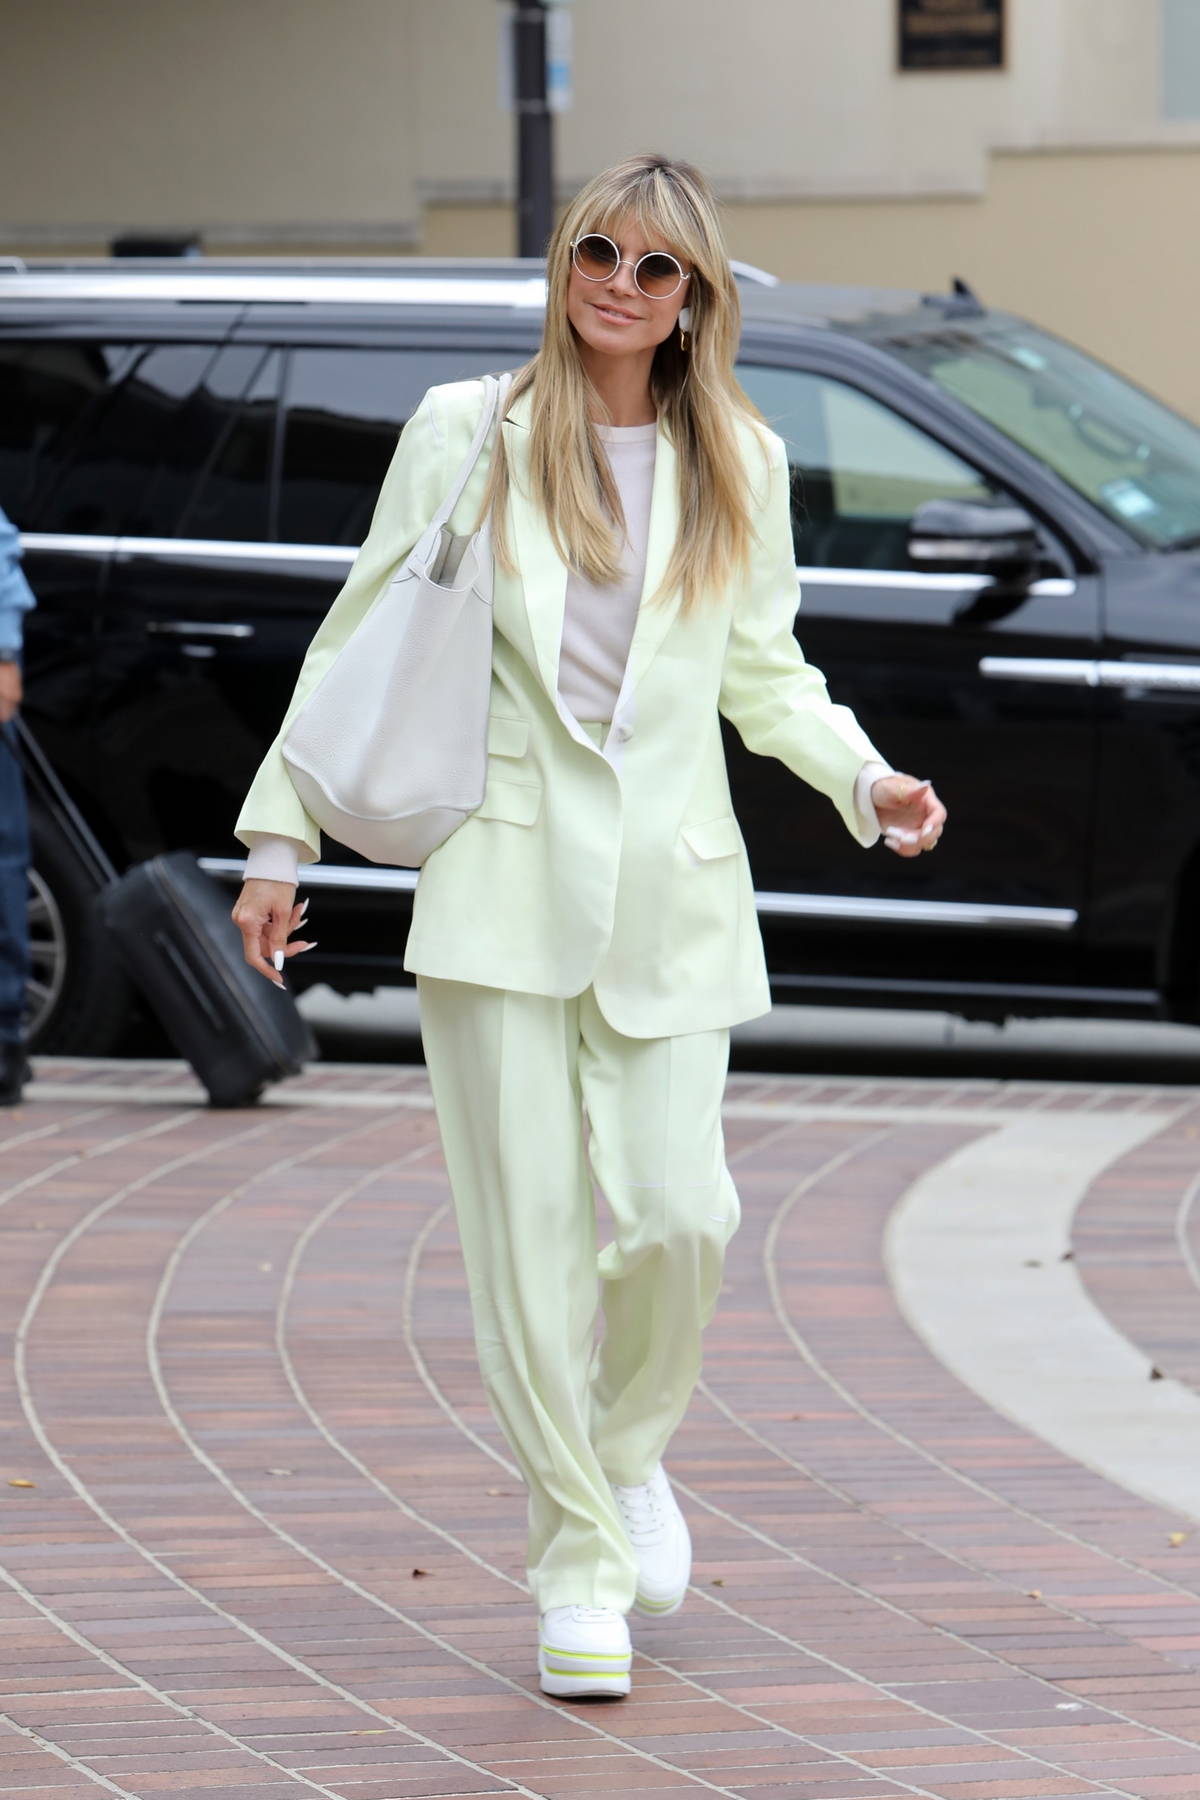 Heidi Klum dons a pastel green suit with matching sneakers as she